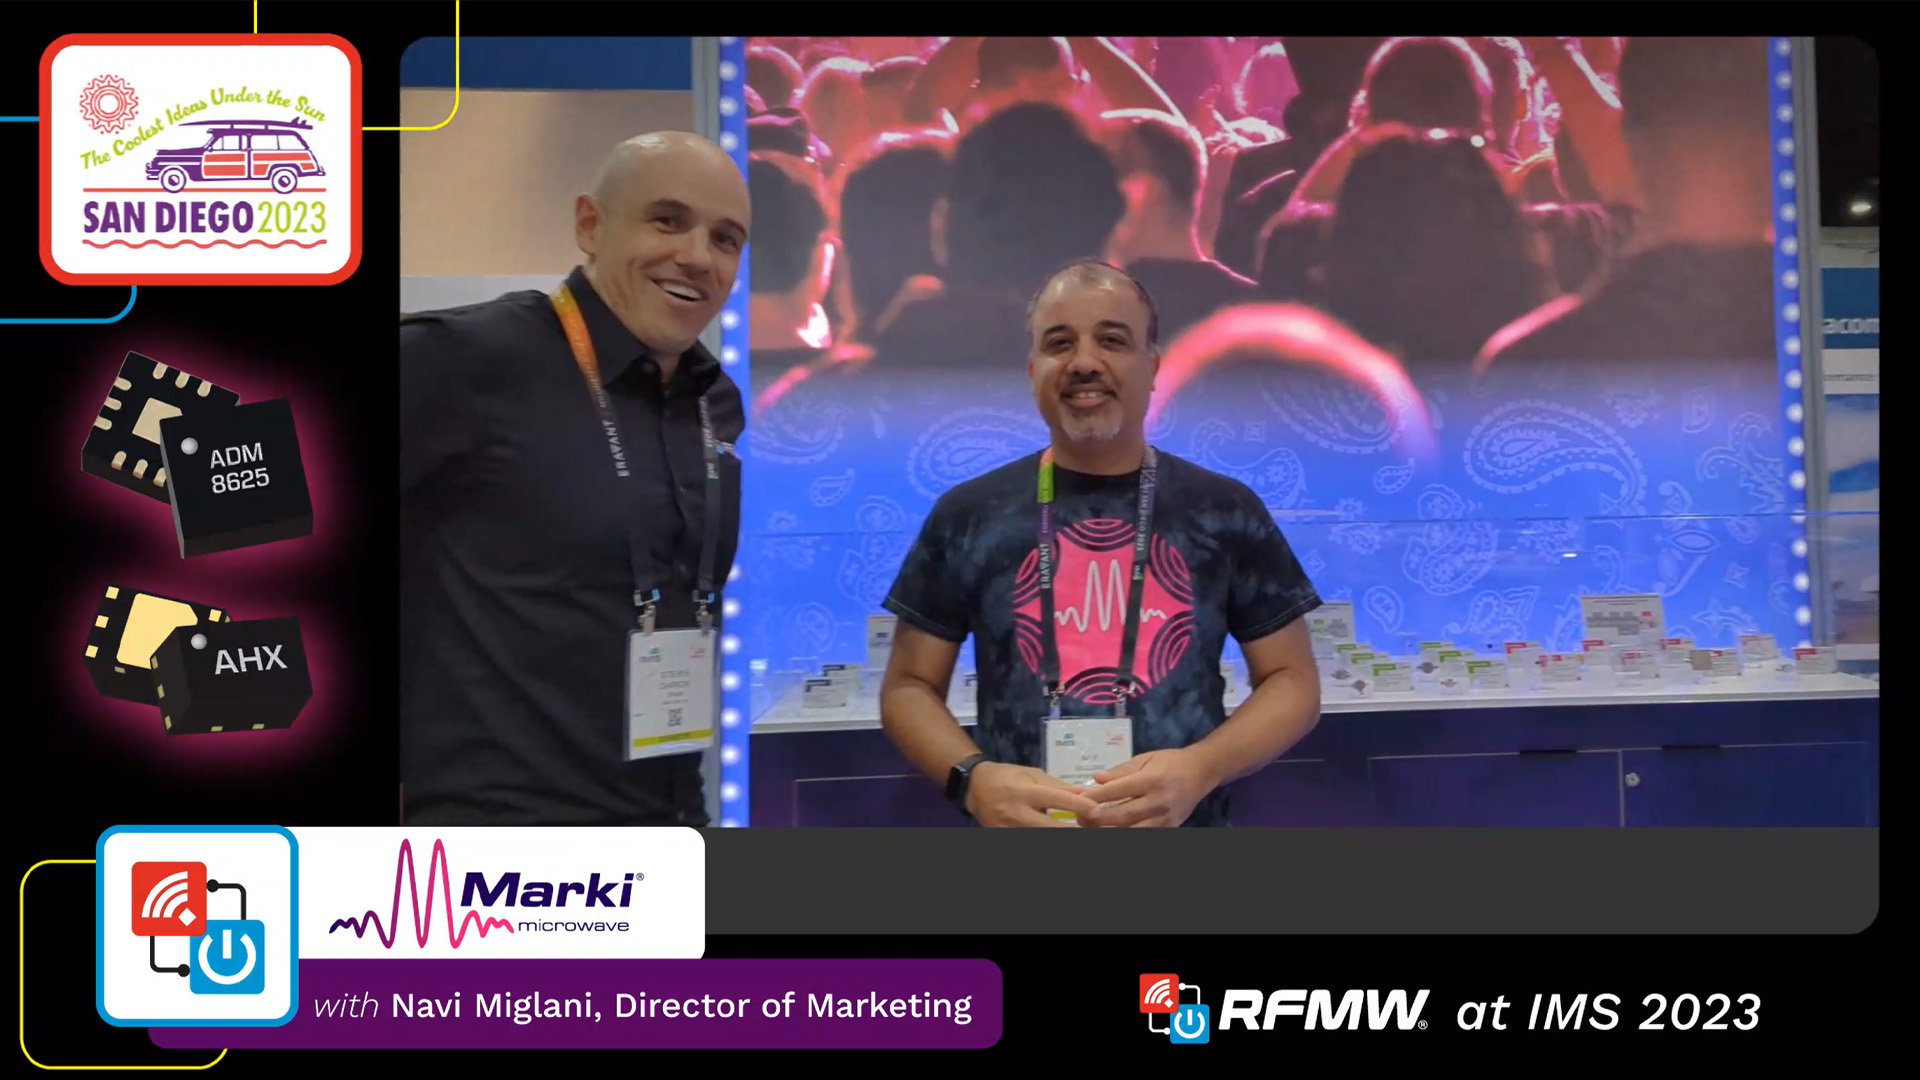 Marki Microwave discusses their impressive product portfolio expansion at the Marki and RFMW booths at IMS 2023.